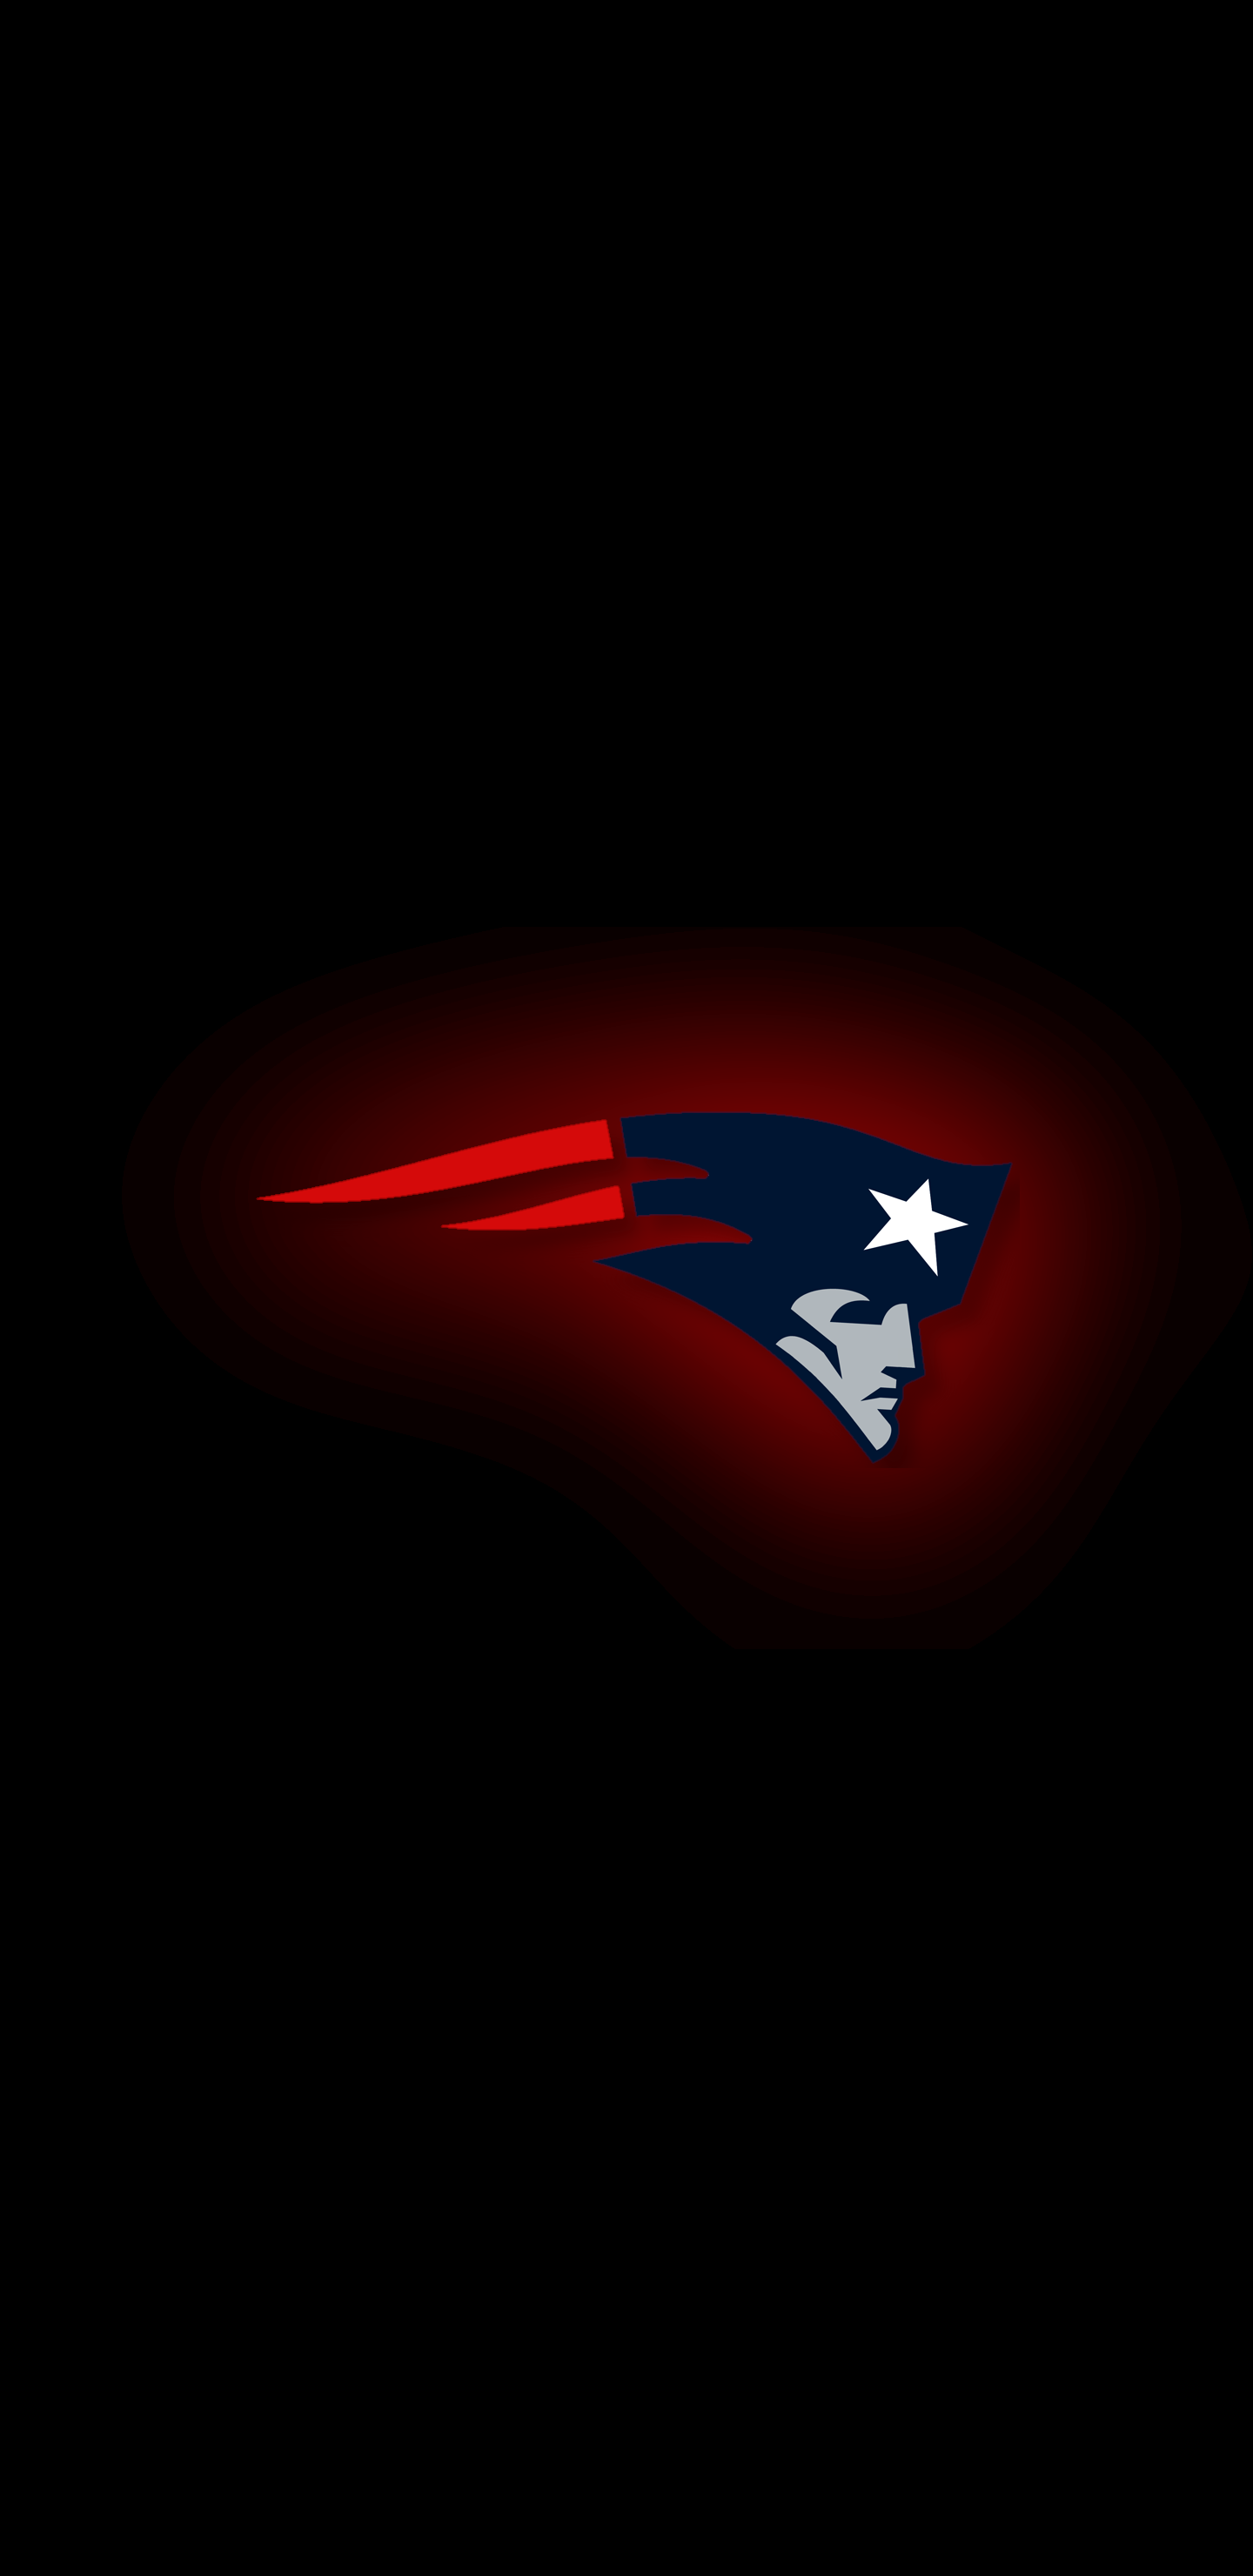 I'm making and amoled wallpaper for every NFL team! 9 down, Patriots. New england patriots wallpaper, New england patriots logo, Nfl patriots